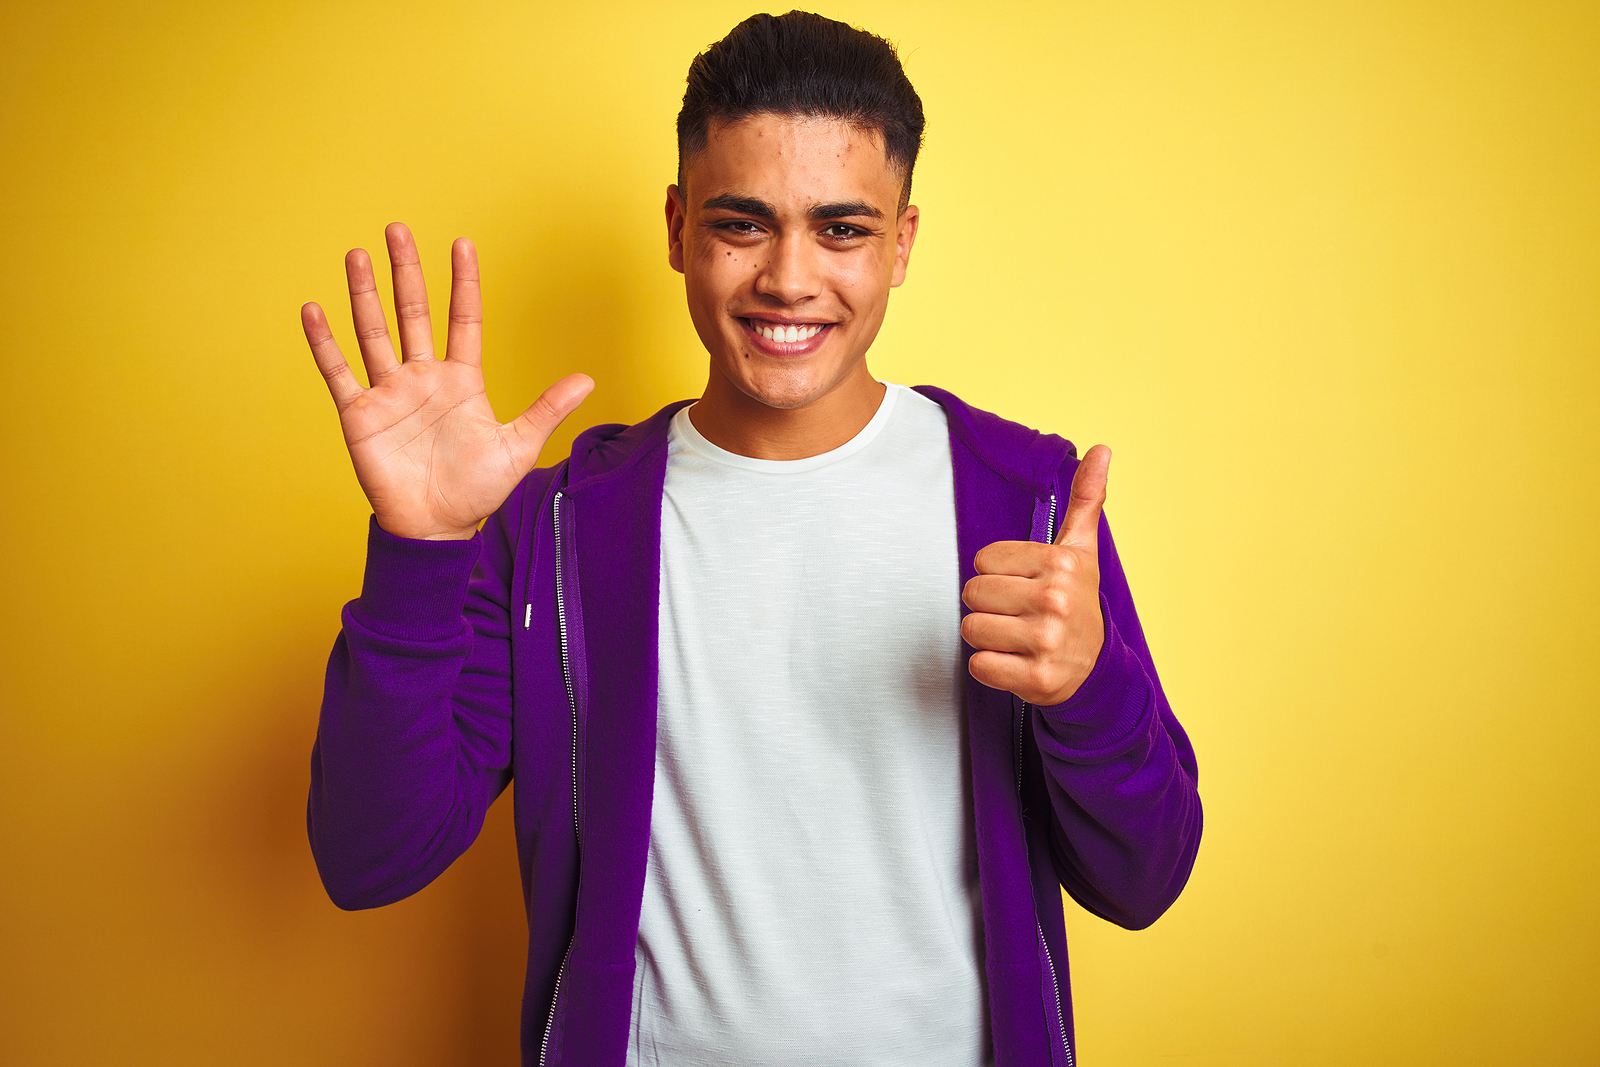 A young latino man smiles while holding 6 fingers up against a plain background. He has on a purple sweater.